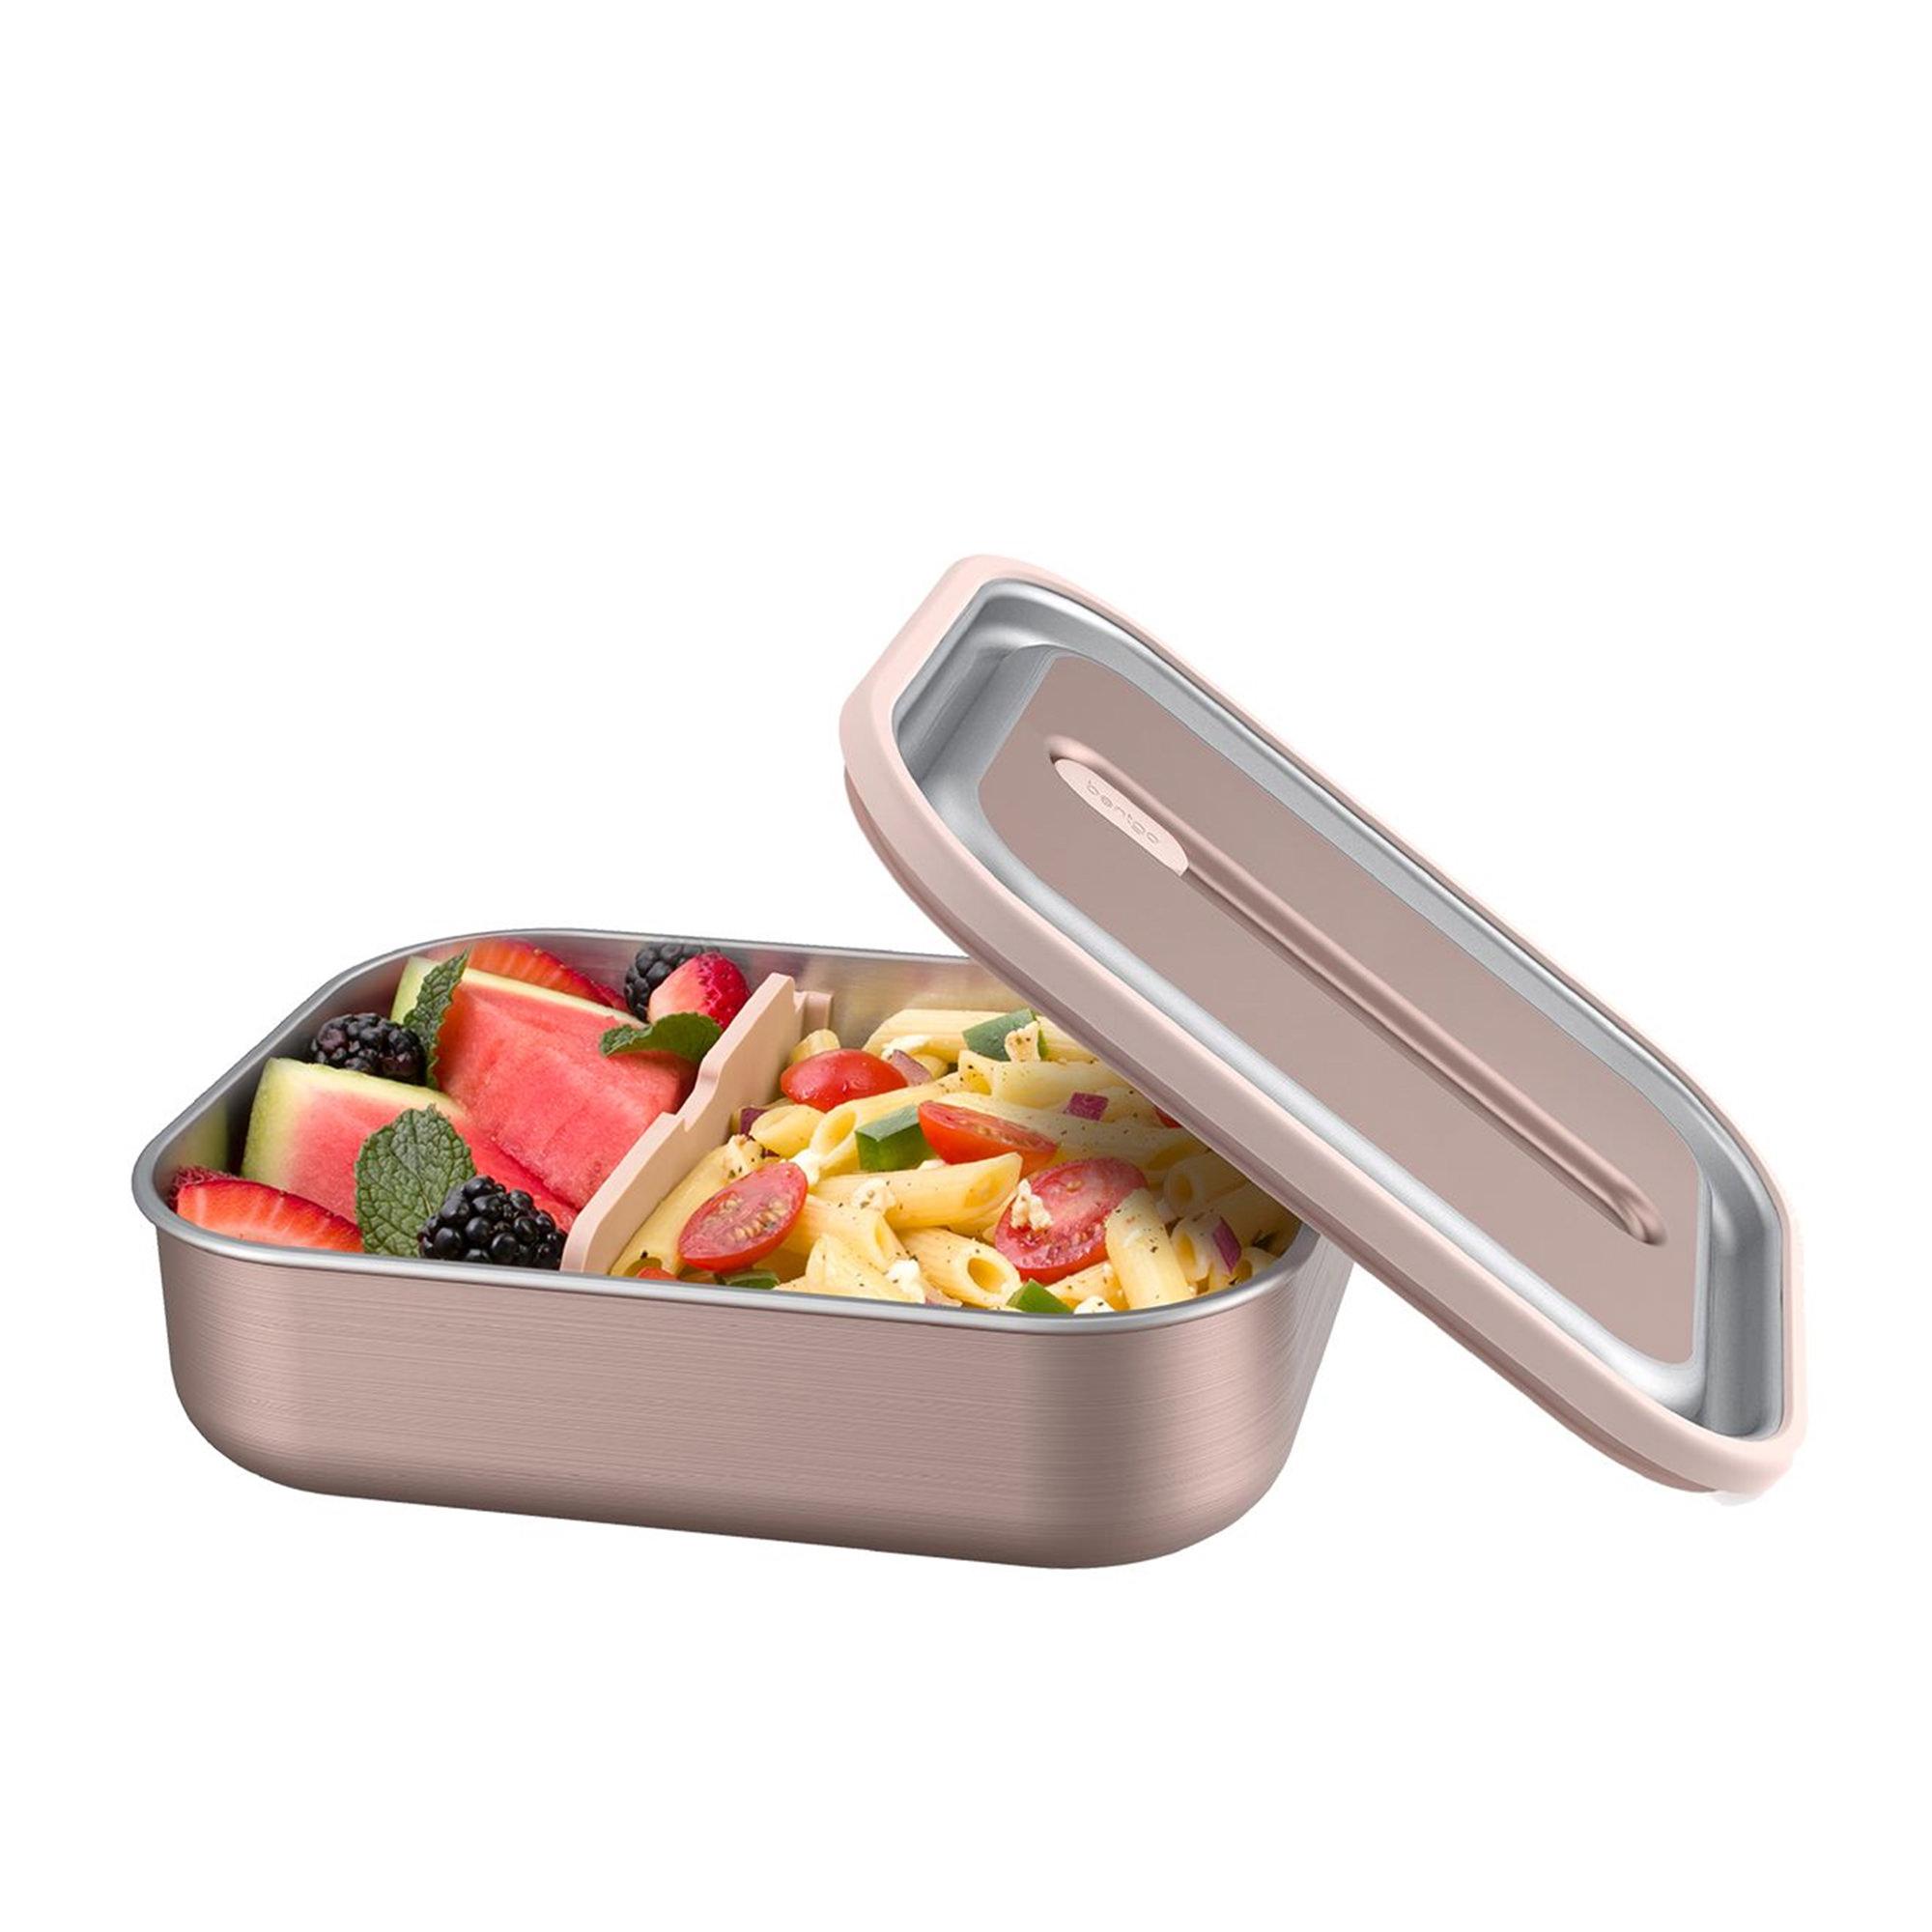 Bentgo Stainless Steel Leak Proof Lunch Box 1.2L Rose Gold Image 4